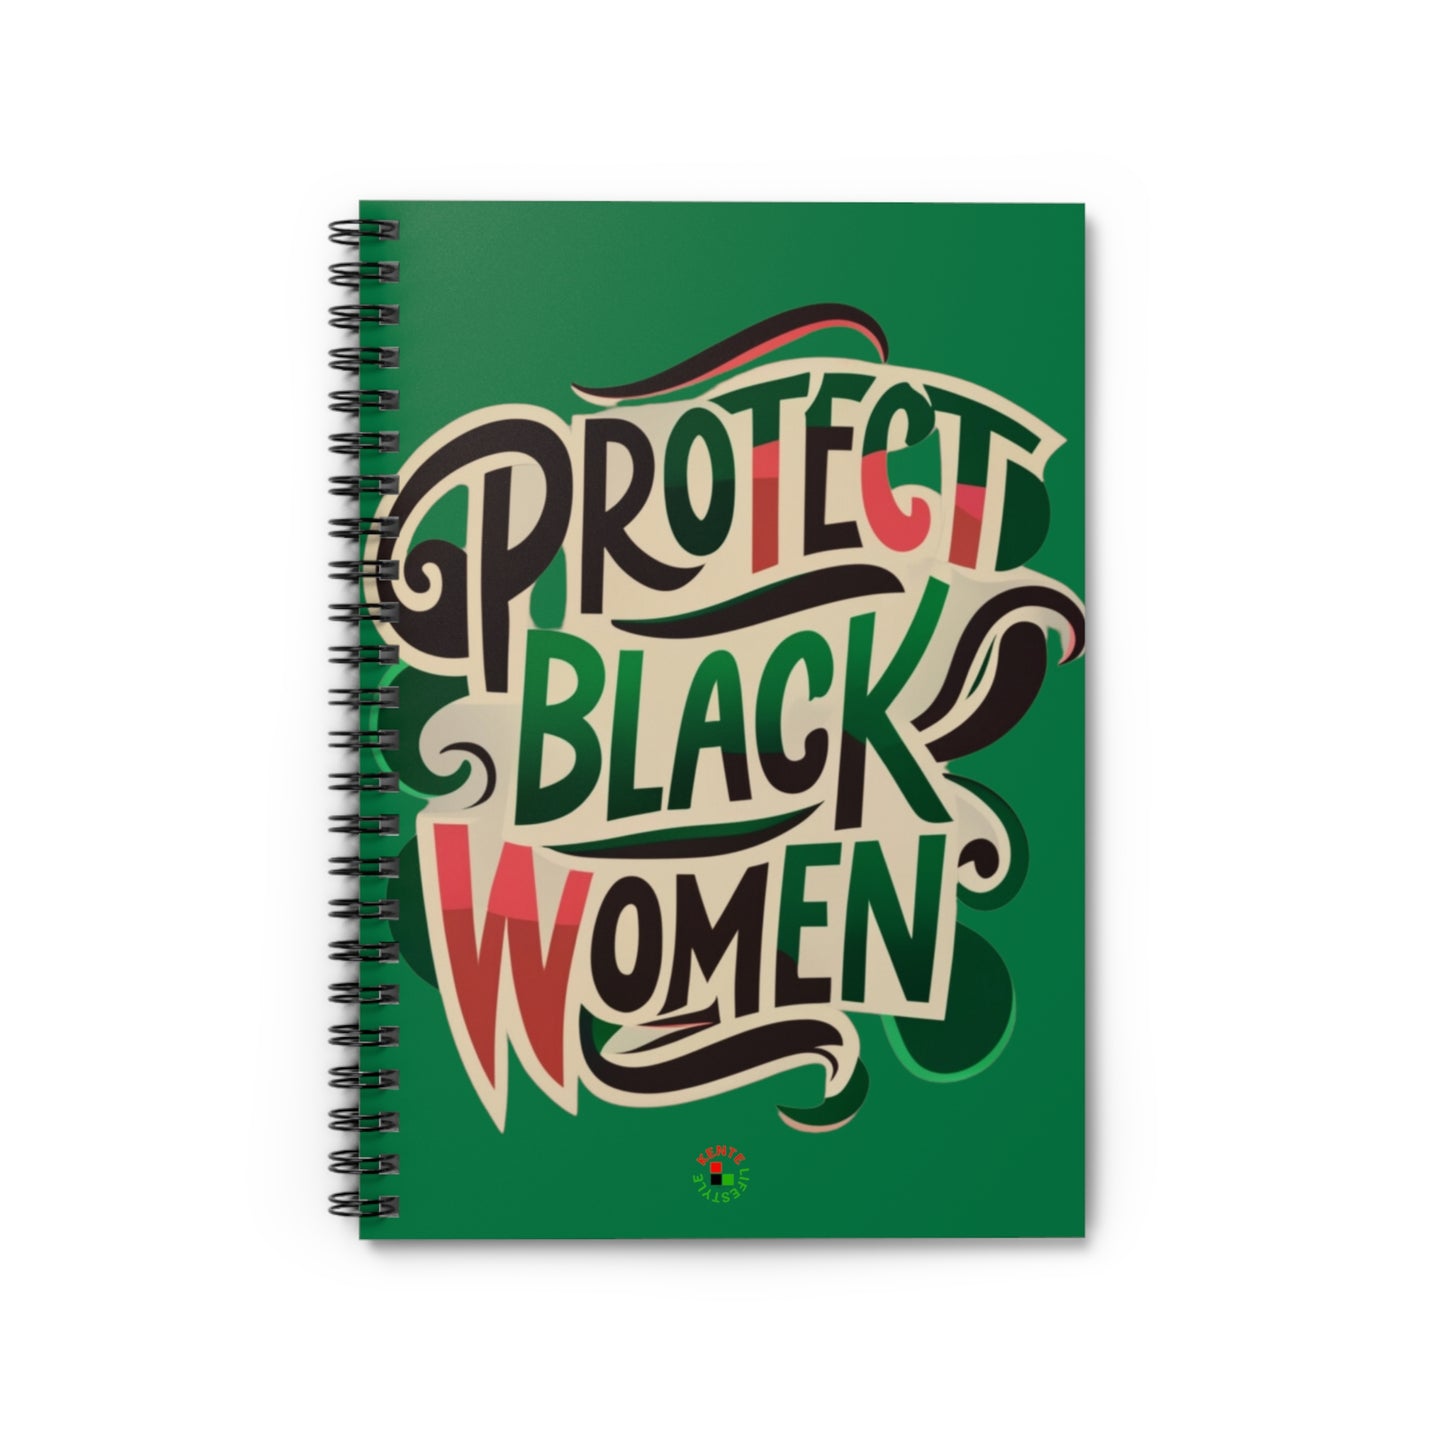 Protect Black Women - Spiral Notebook (Ruled Line)